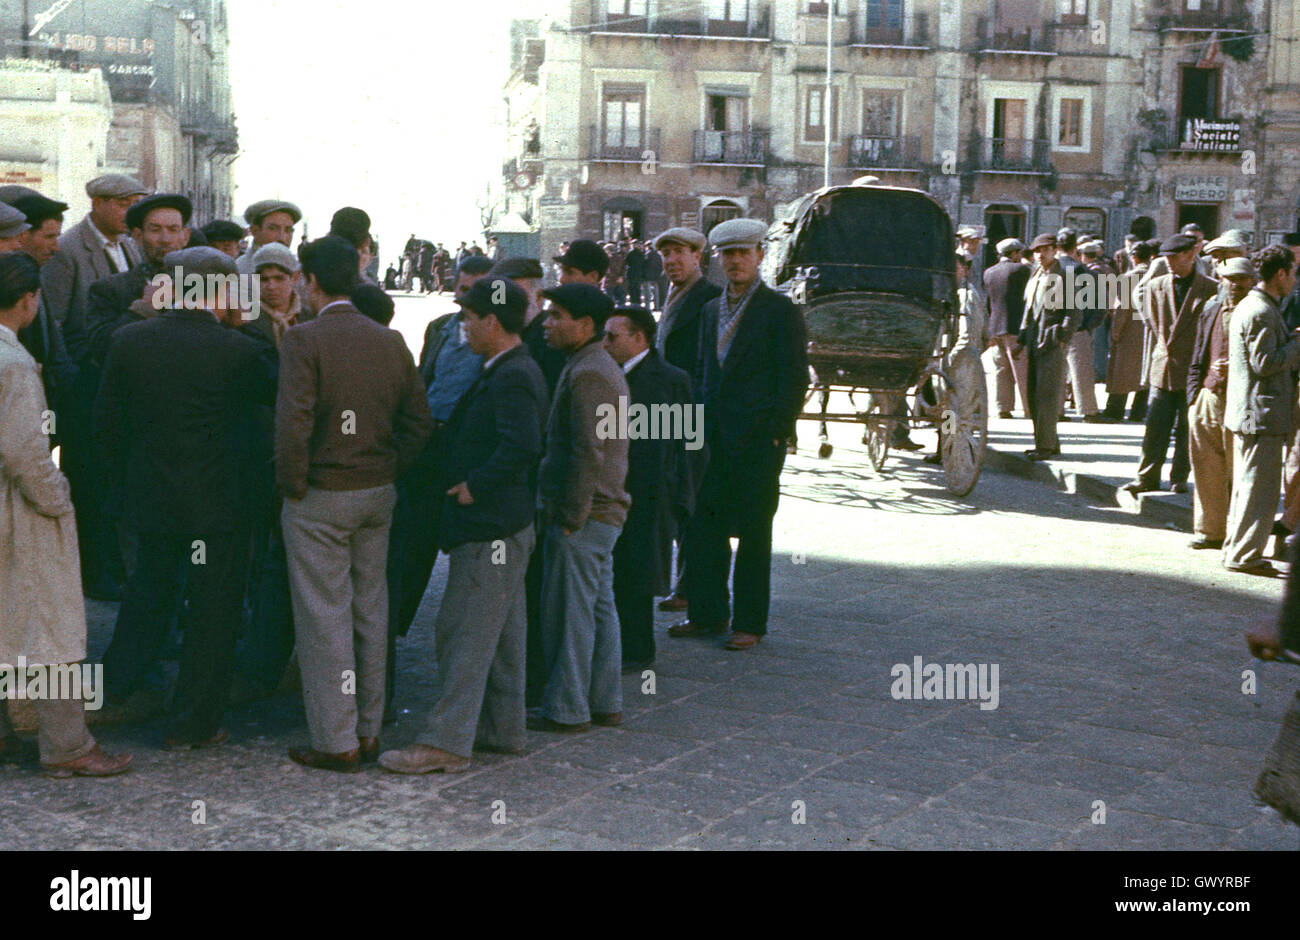 1951 historical, post-world war 11 and unemployed men gather in the town square of Gela, Sicily, Italy. Stock Photo